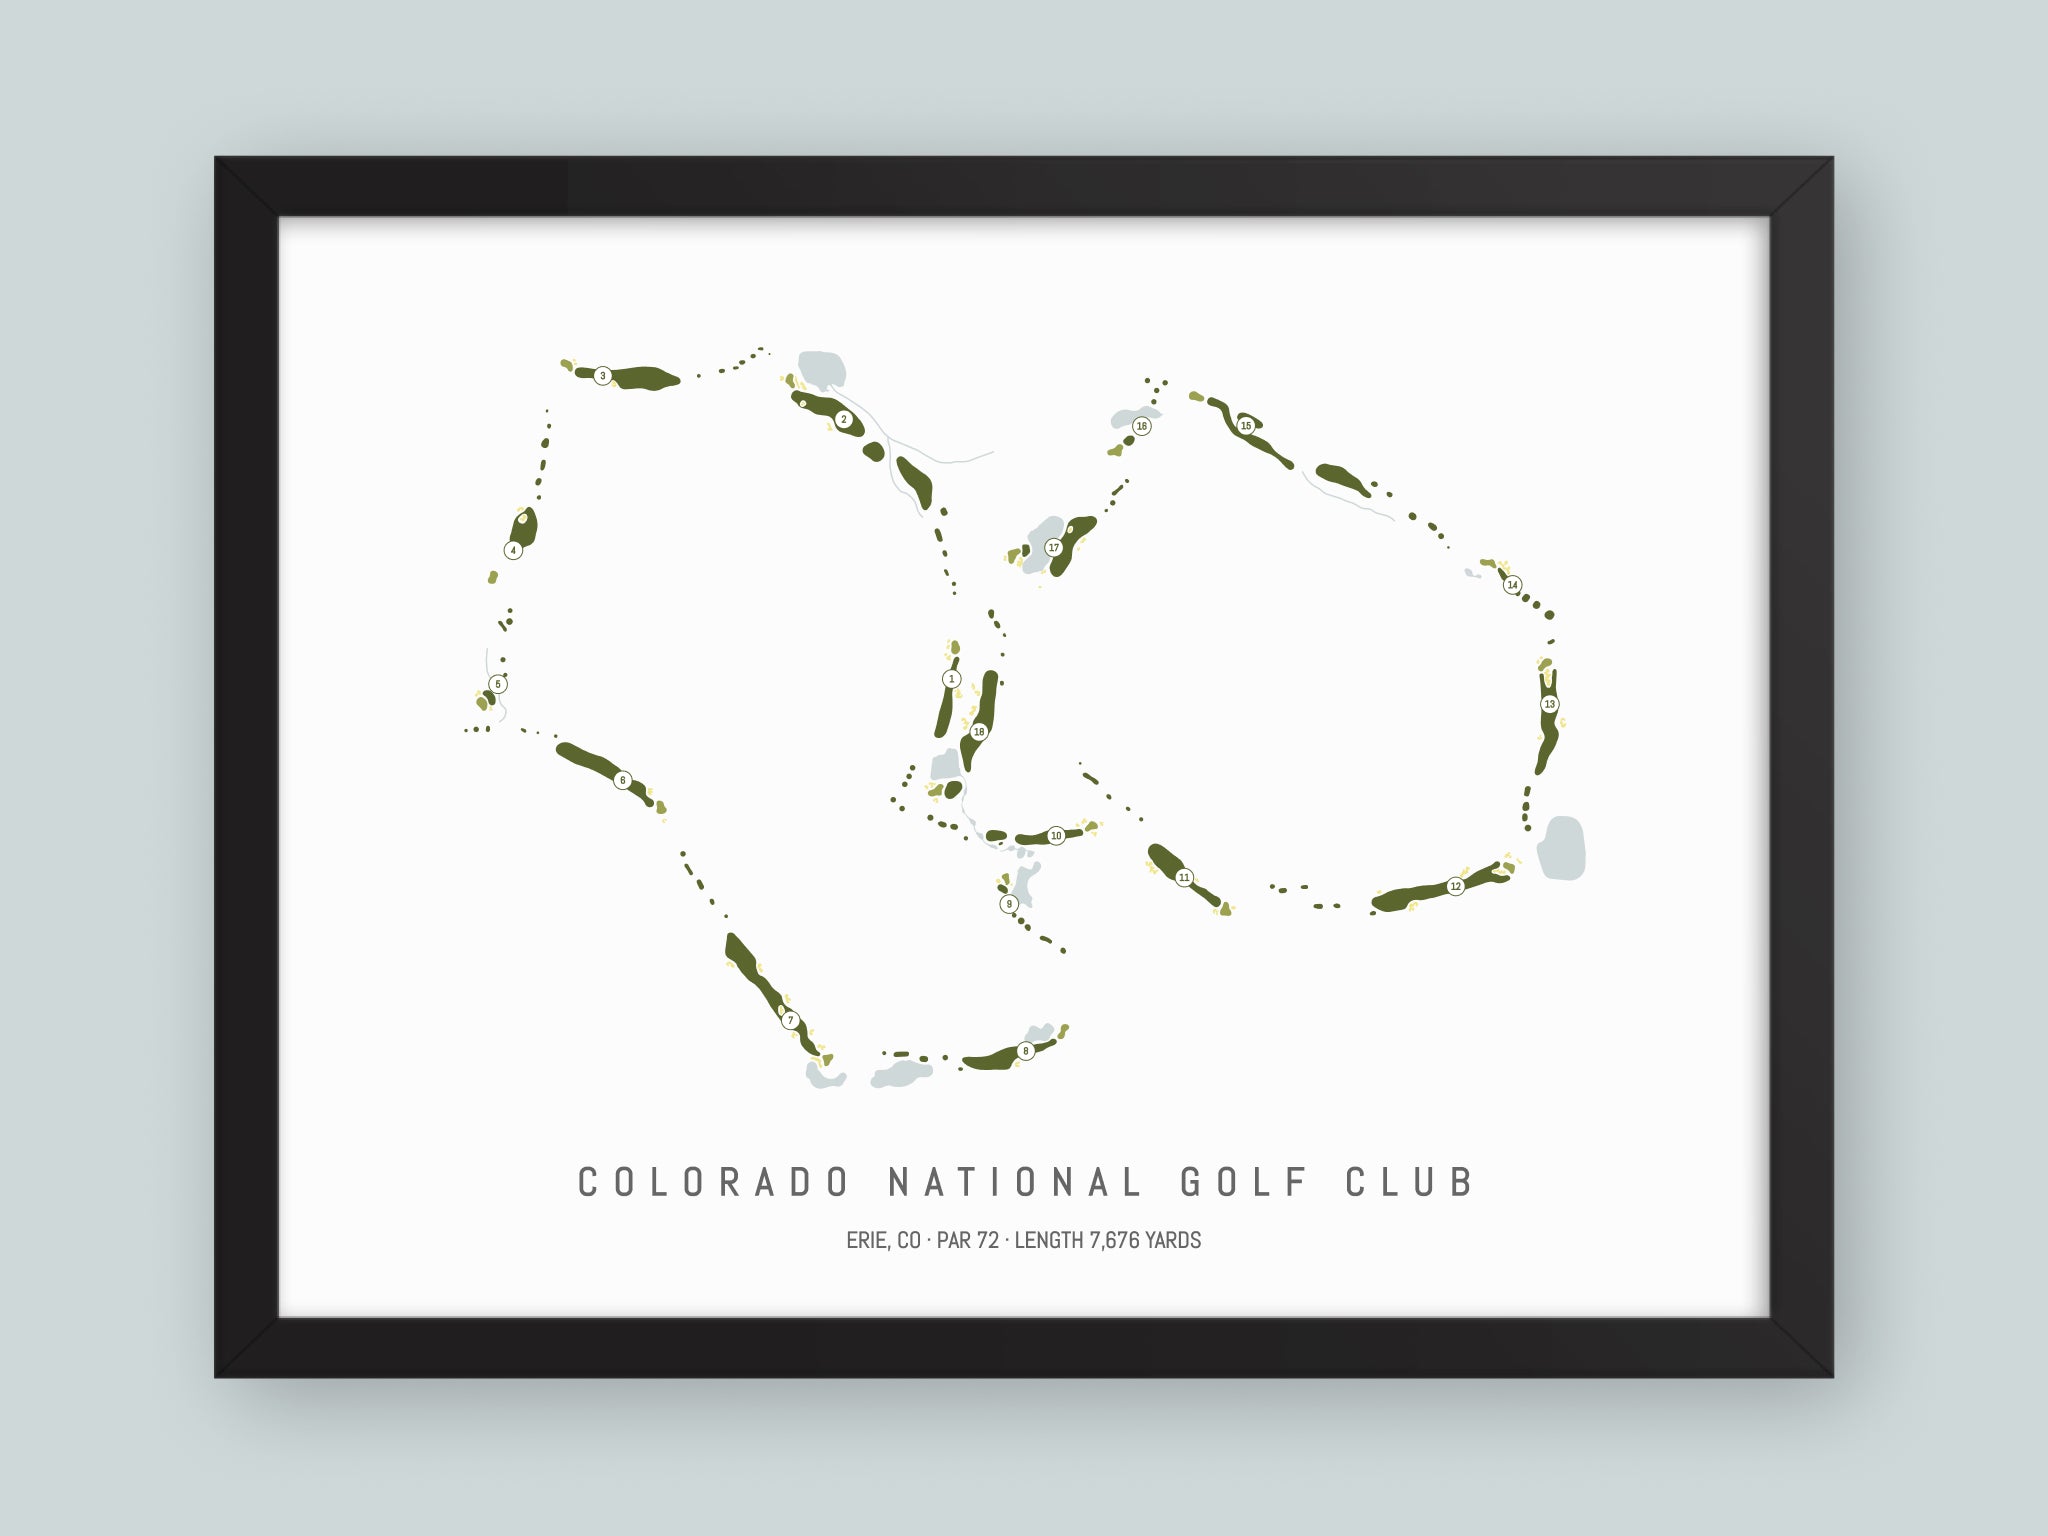 Colorado-National-Golf-Club-CO--Black-Frame-24x18-With-Hole-Numbers